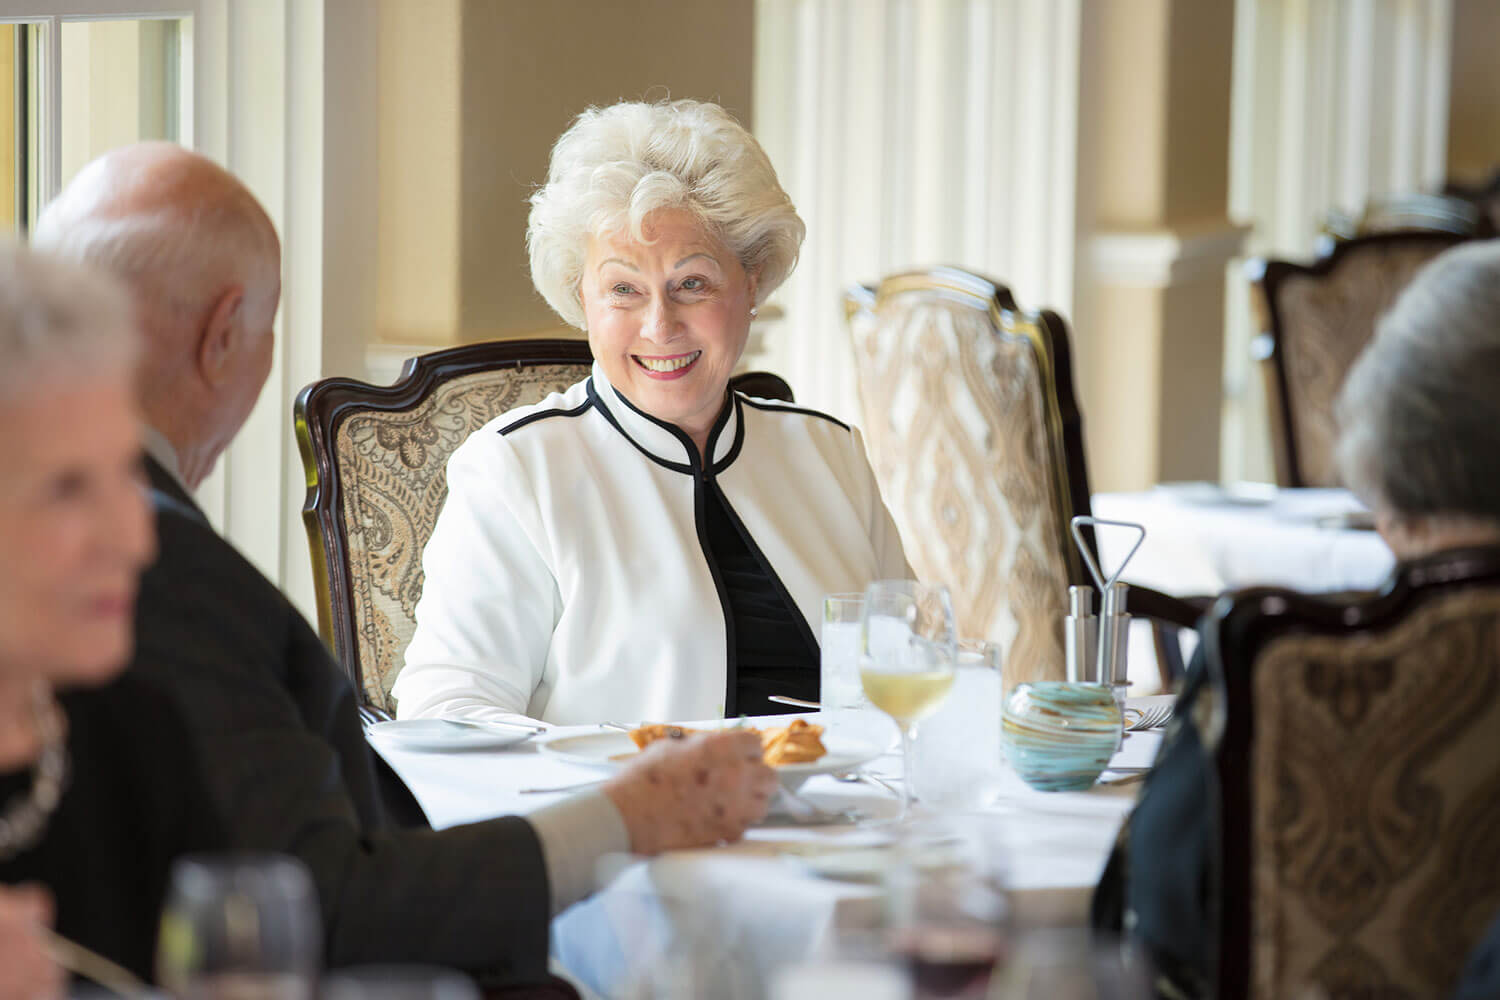 Senior woman seated with her husband enjoying a meal together